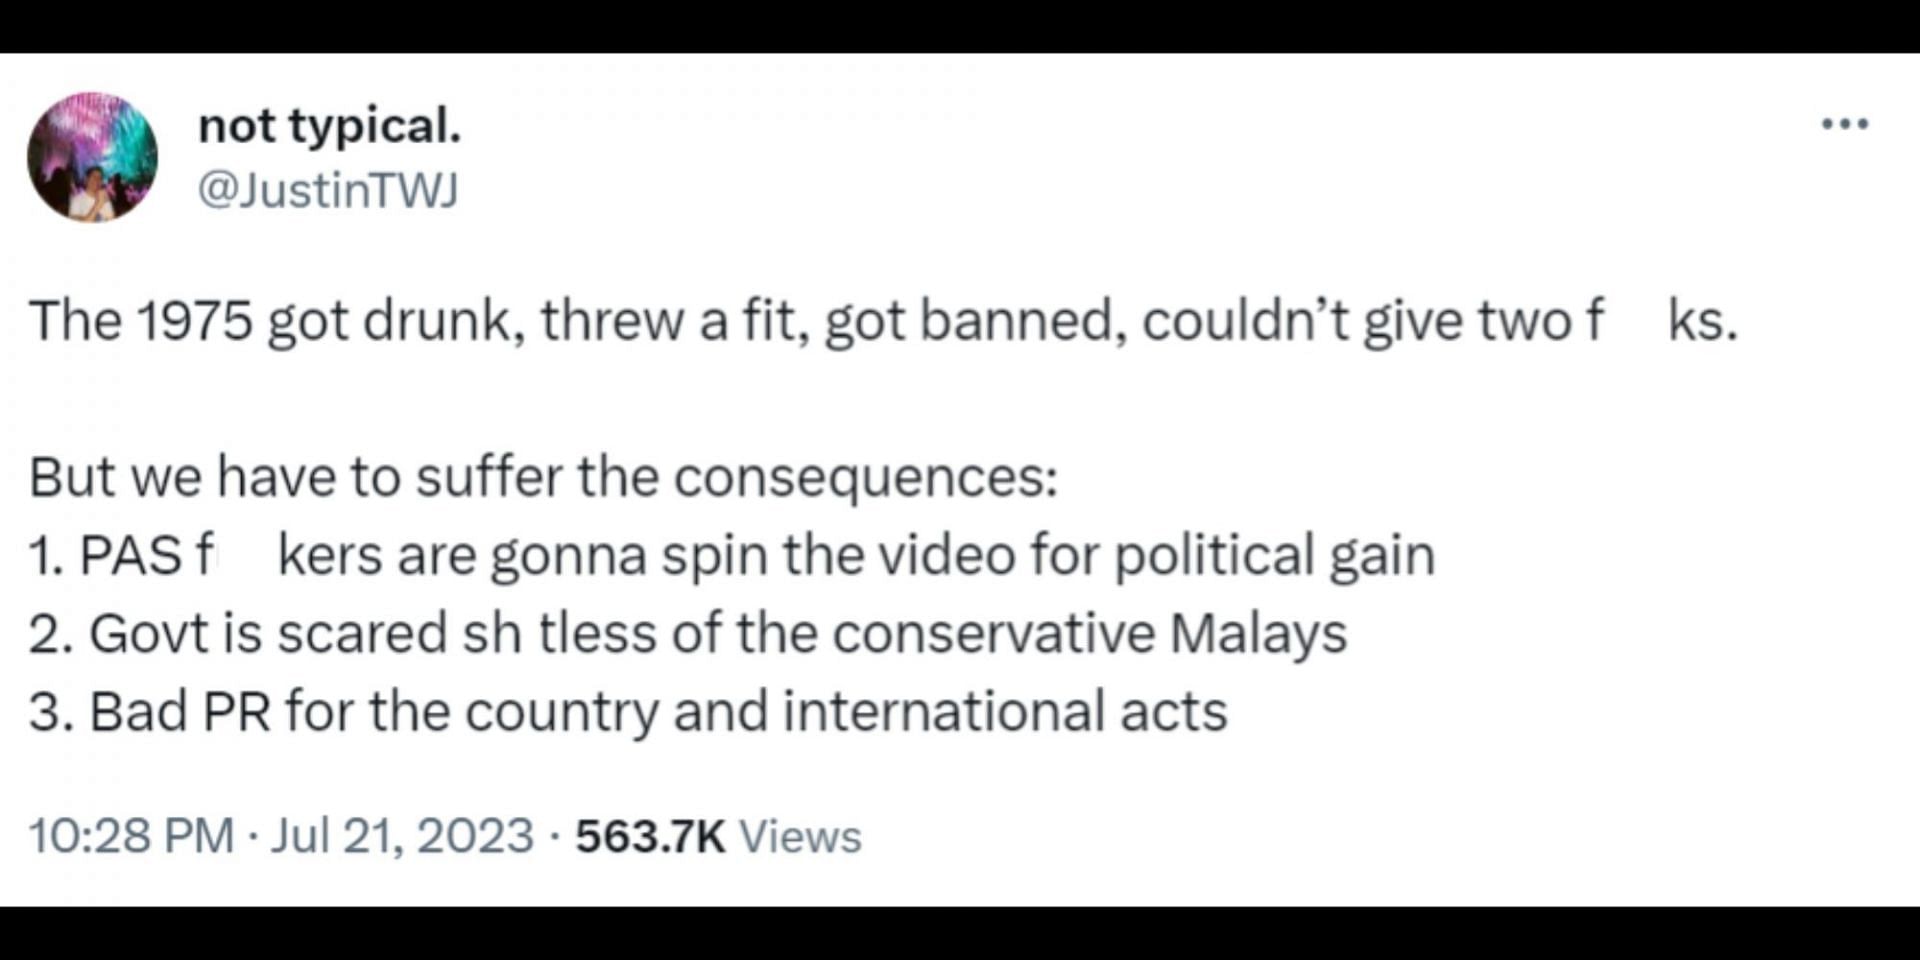 The 1975 garners backlash from netizens following their ban from Kuala Lumpur. (Image via Twitter/@JustinTWJ)